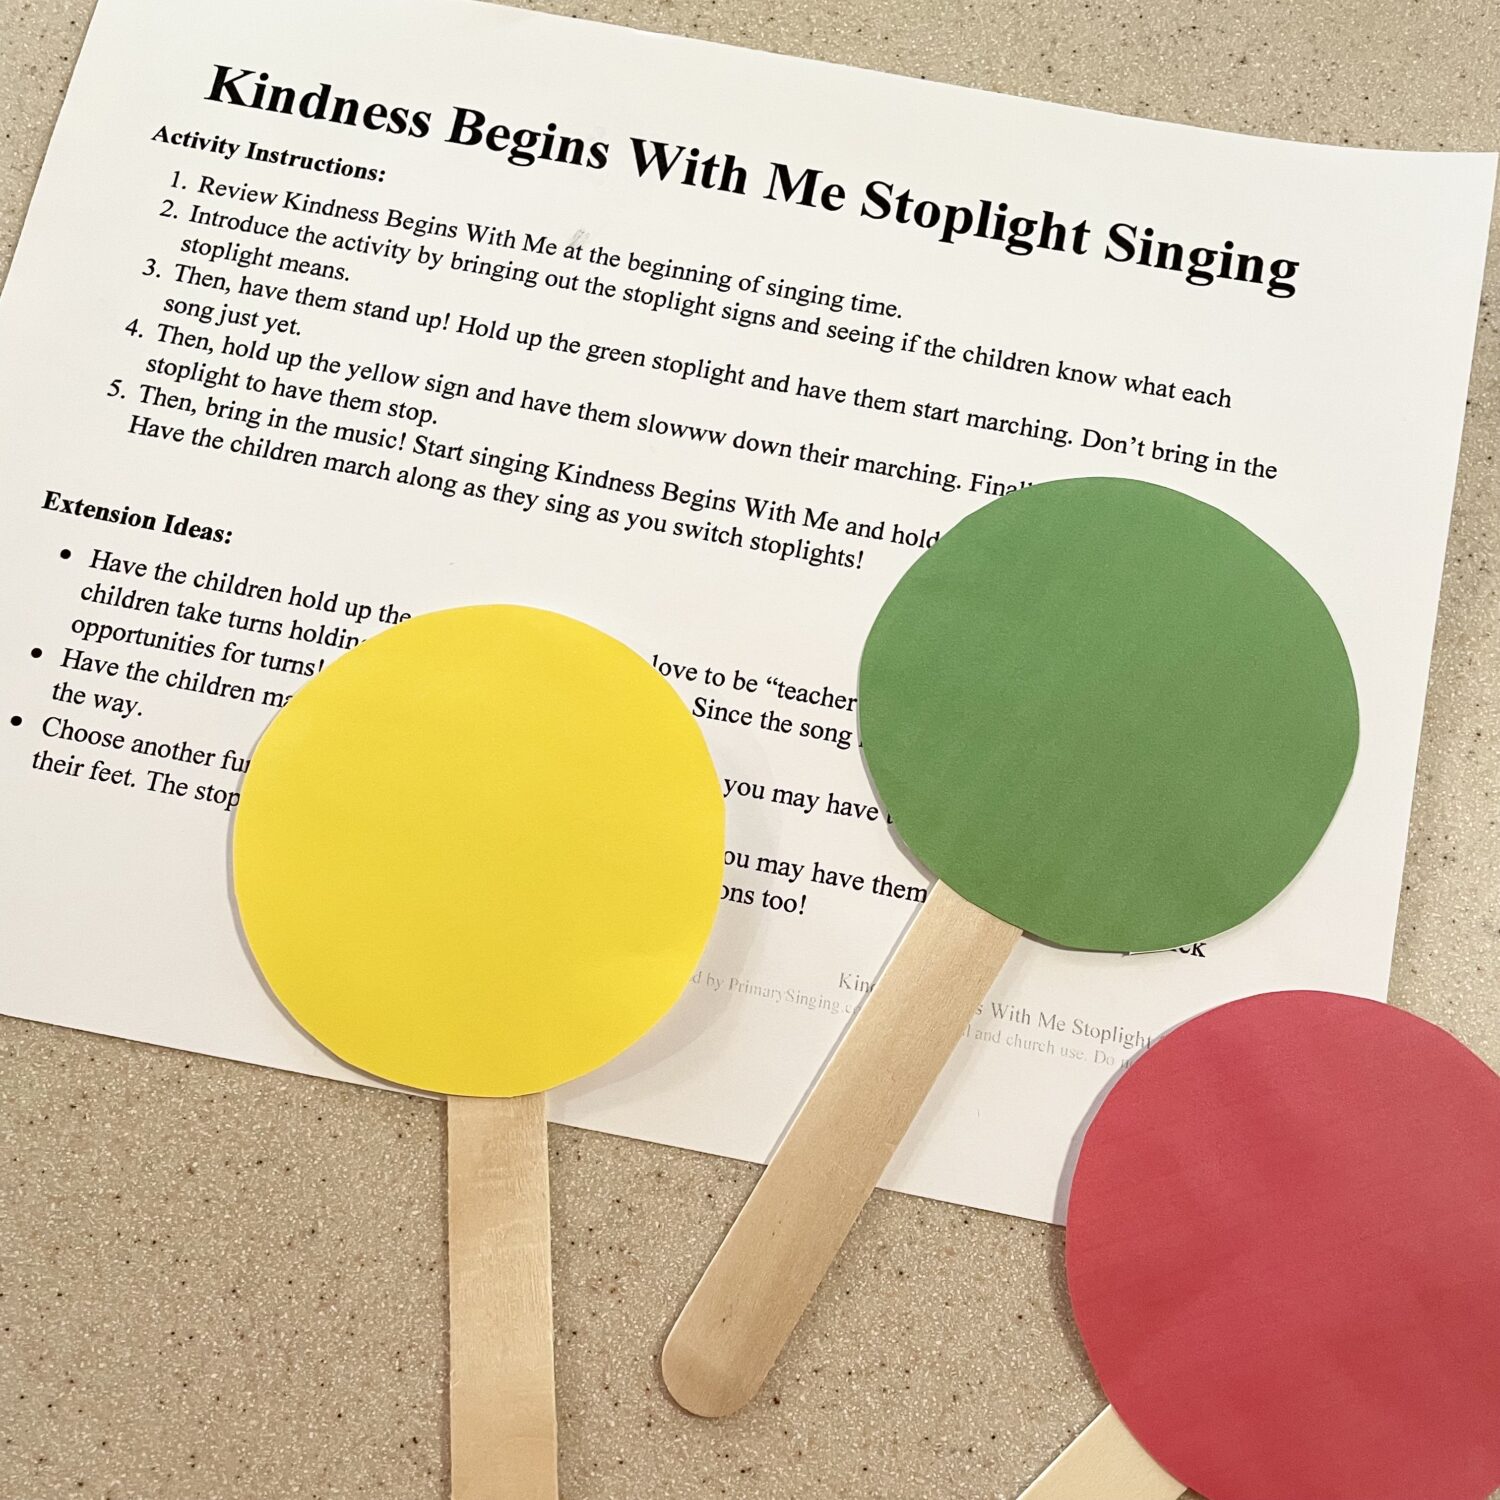 Kindness Begins With Me Stoplight Singing Easy ideas for Music Leaders IMG 7034